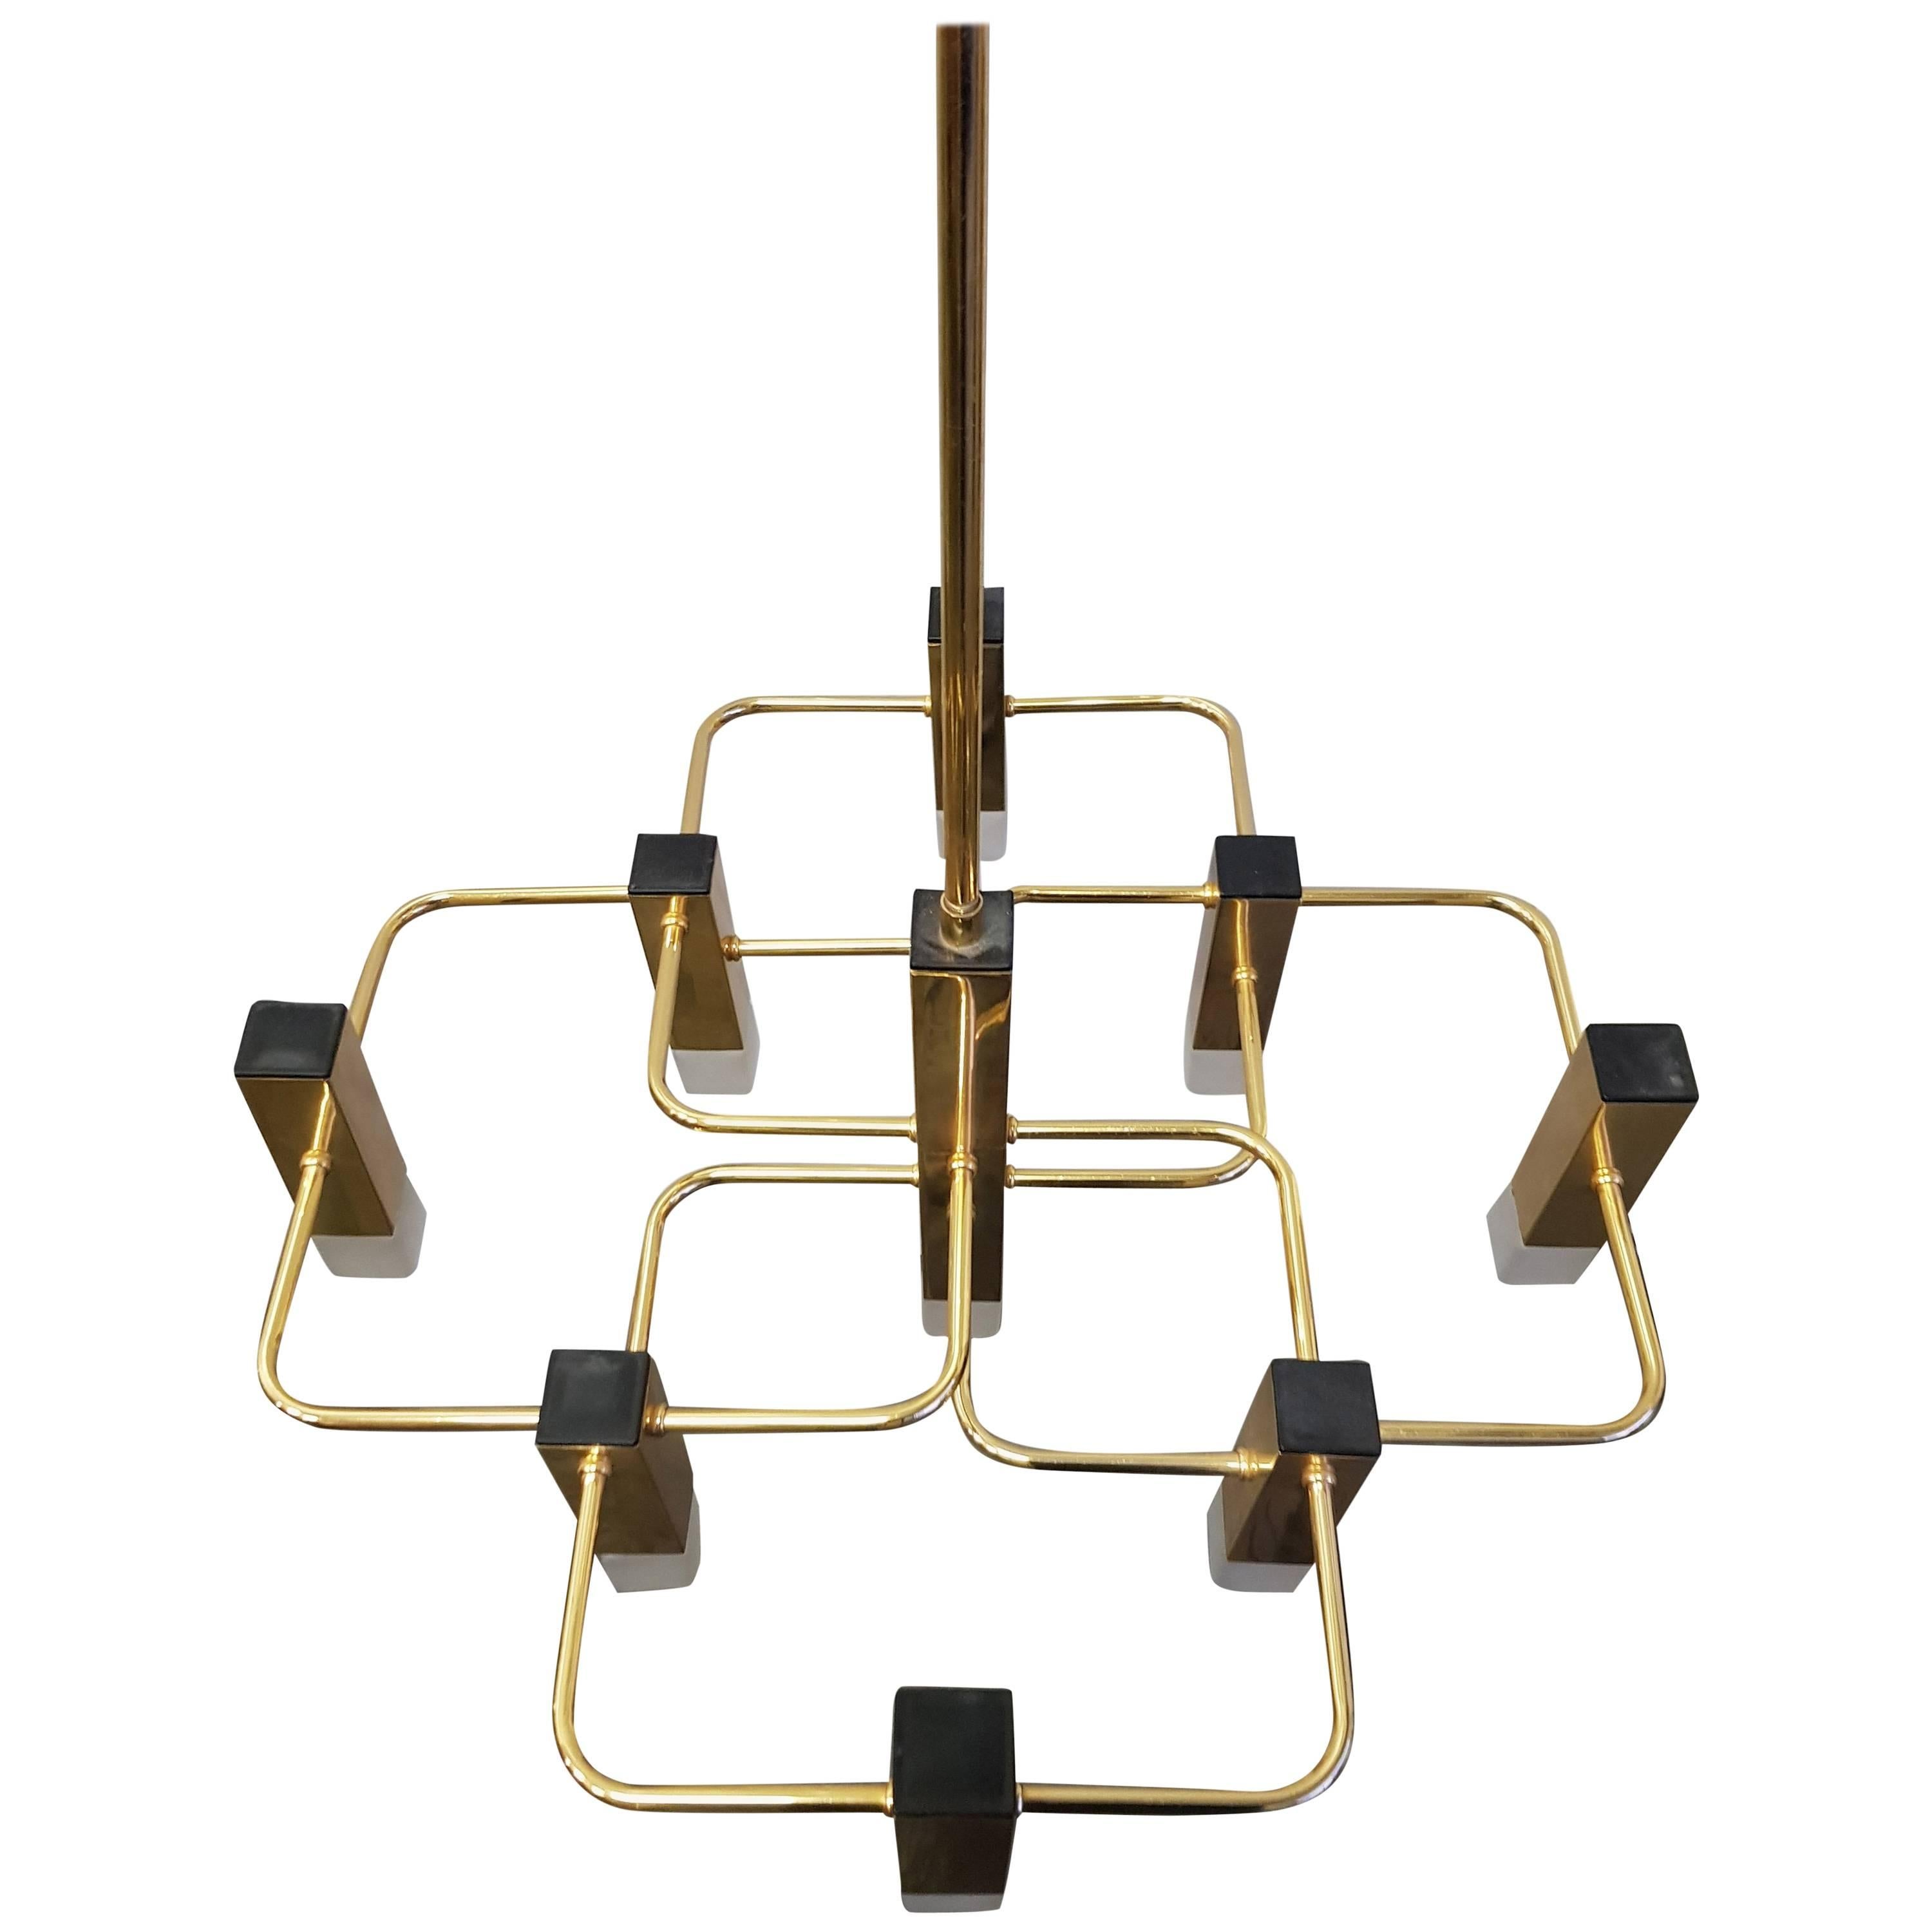 Stunning Gaetano Boulanger Sciolari sealing lamp.
Nine light points.
In excellent condition, all lamps are working and original! Inclusive one extra original lamp.